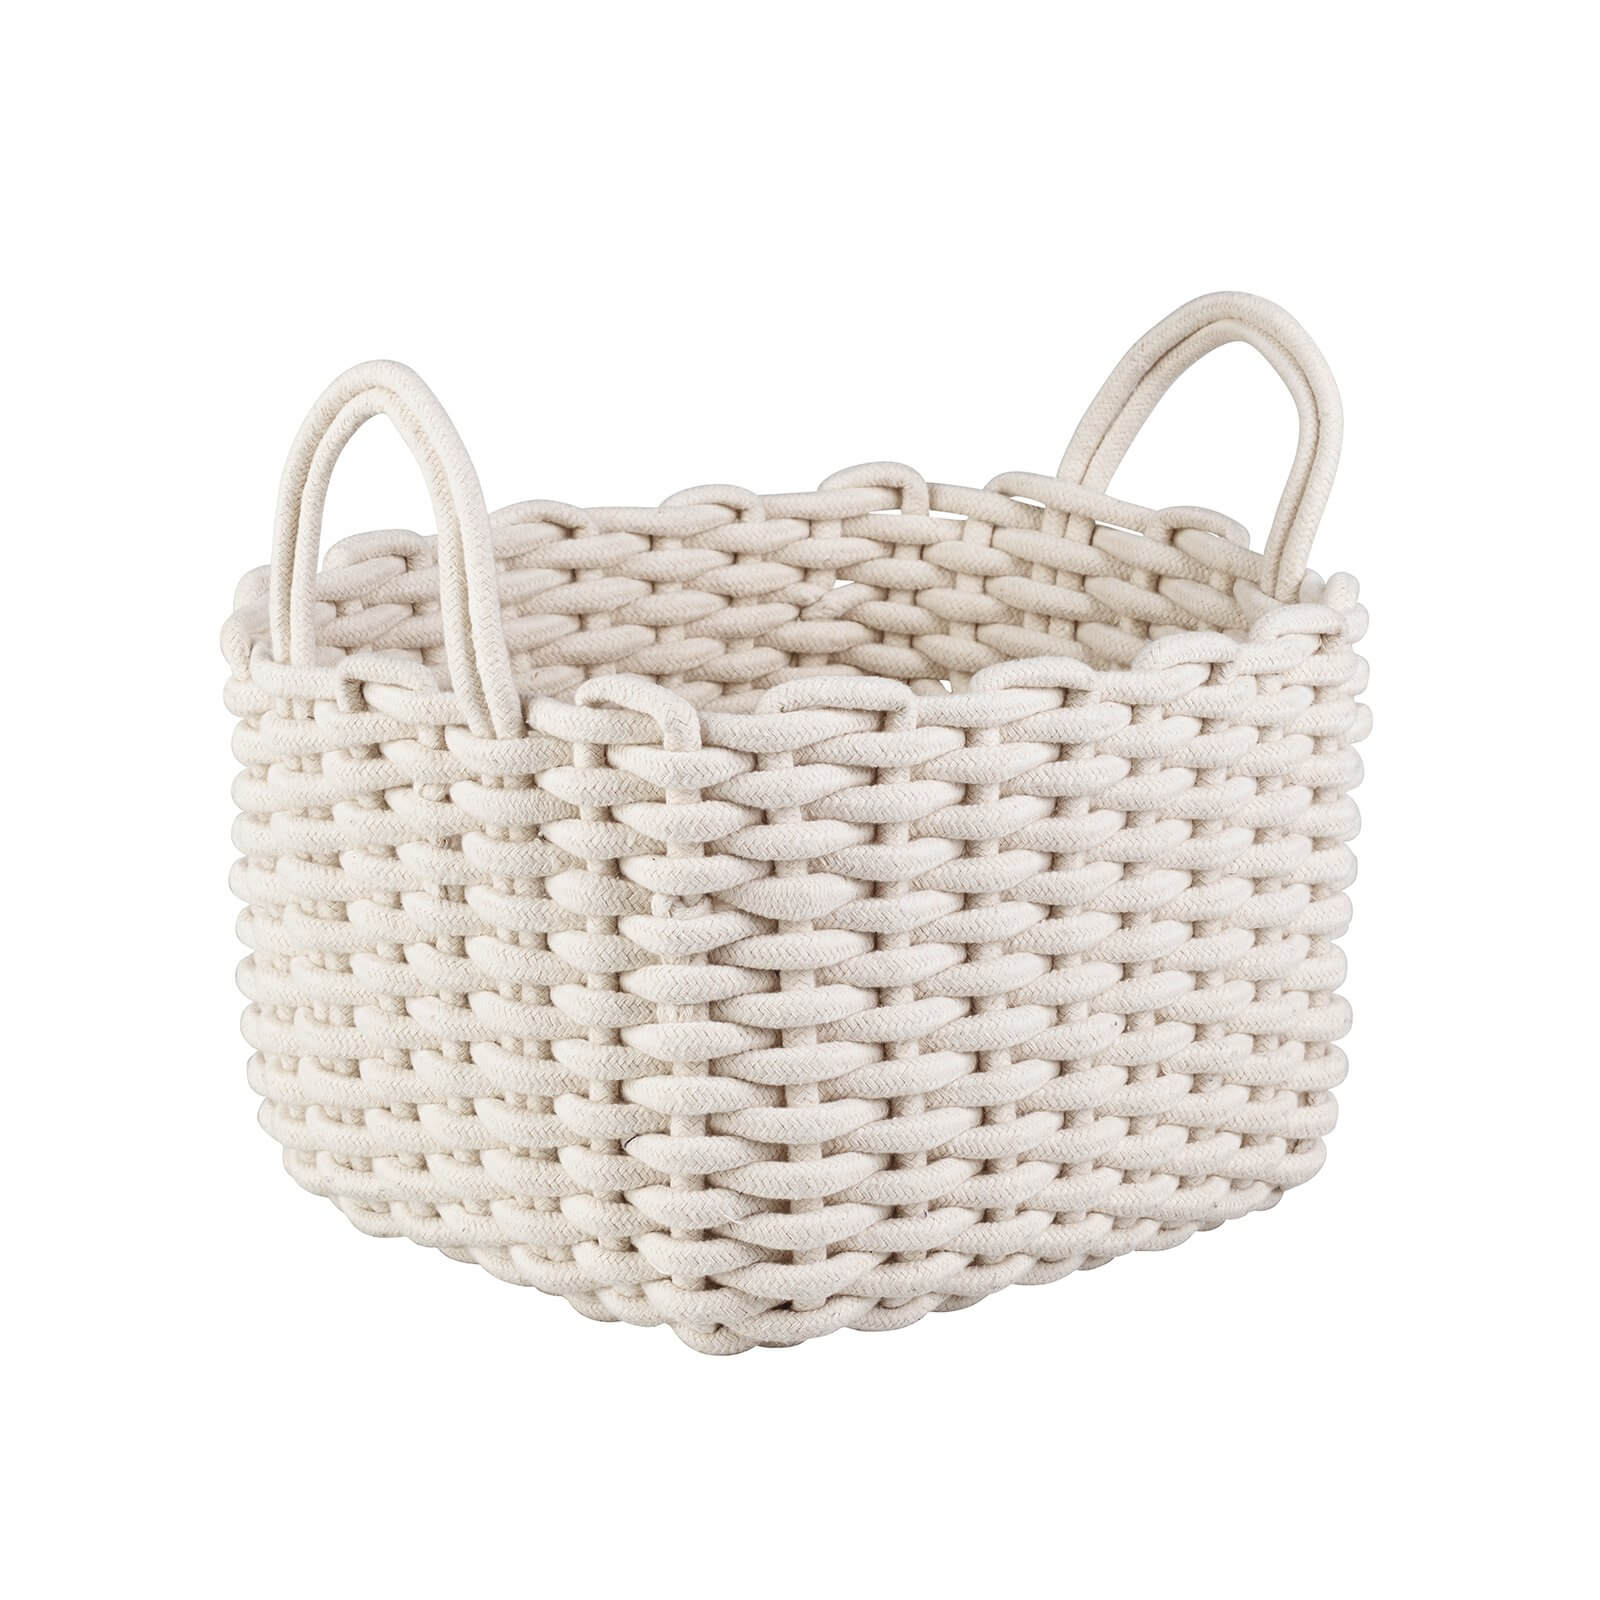 Photo of Rope Weave Basket - White